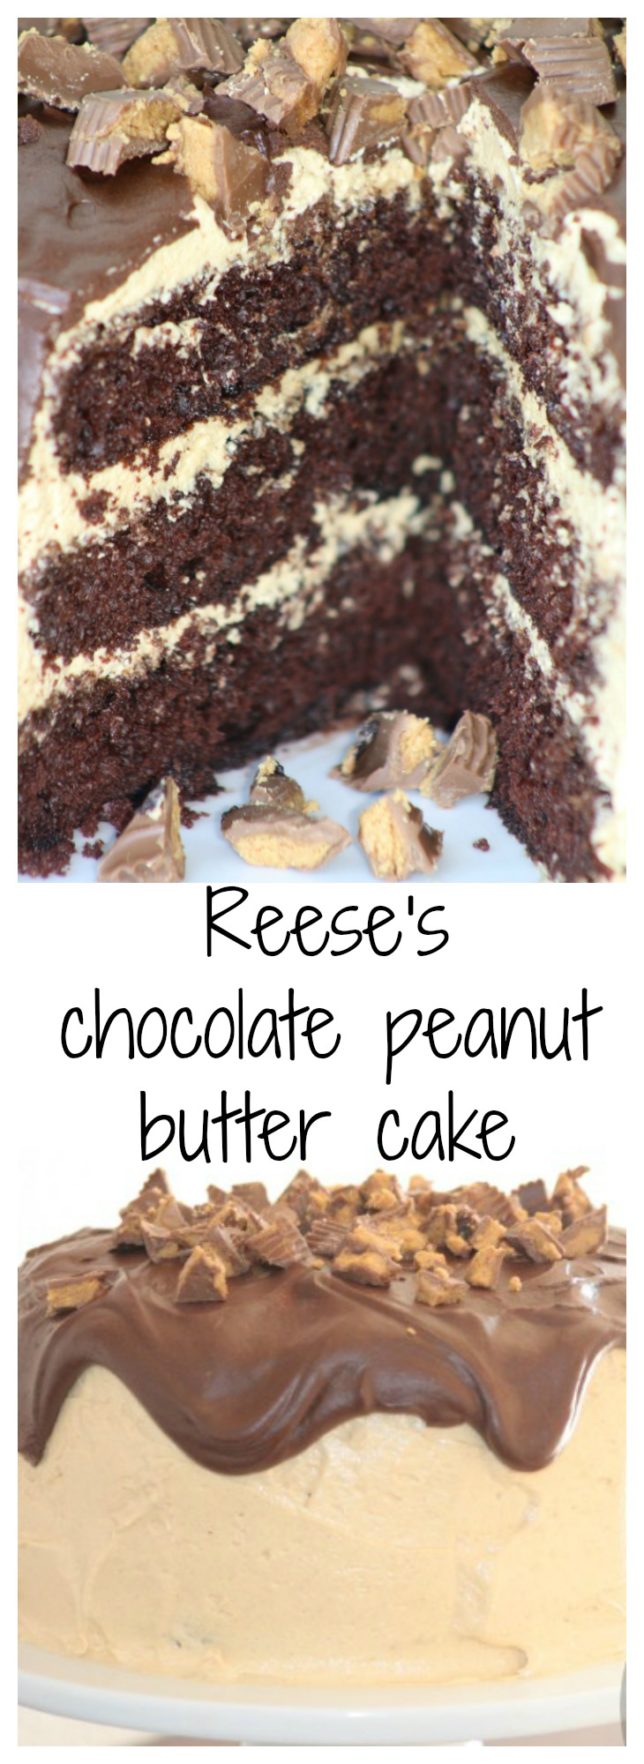 Reese's chocolate peanut butter cake